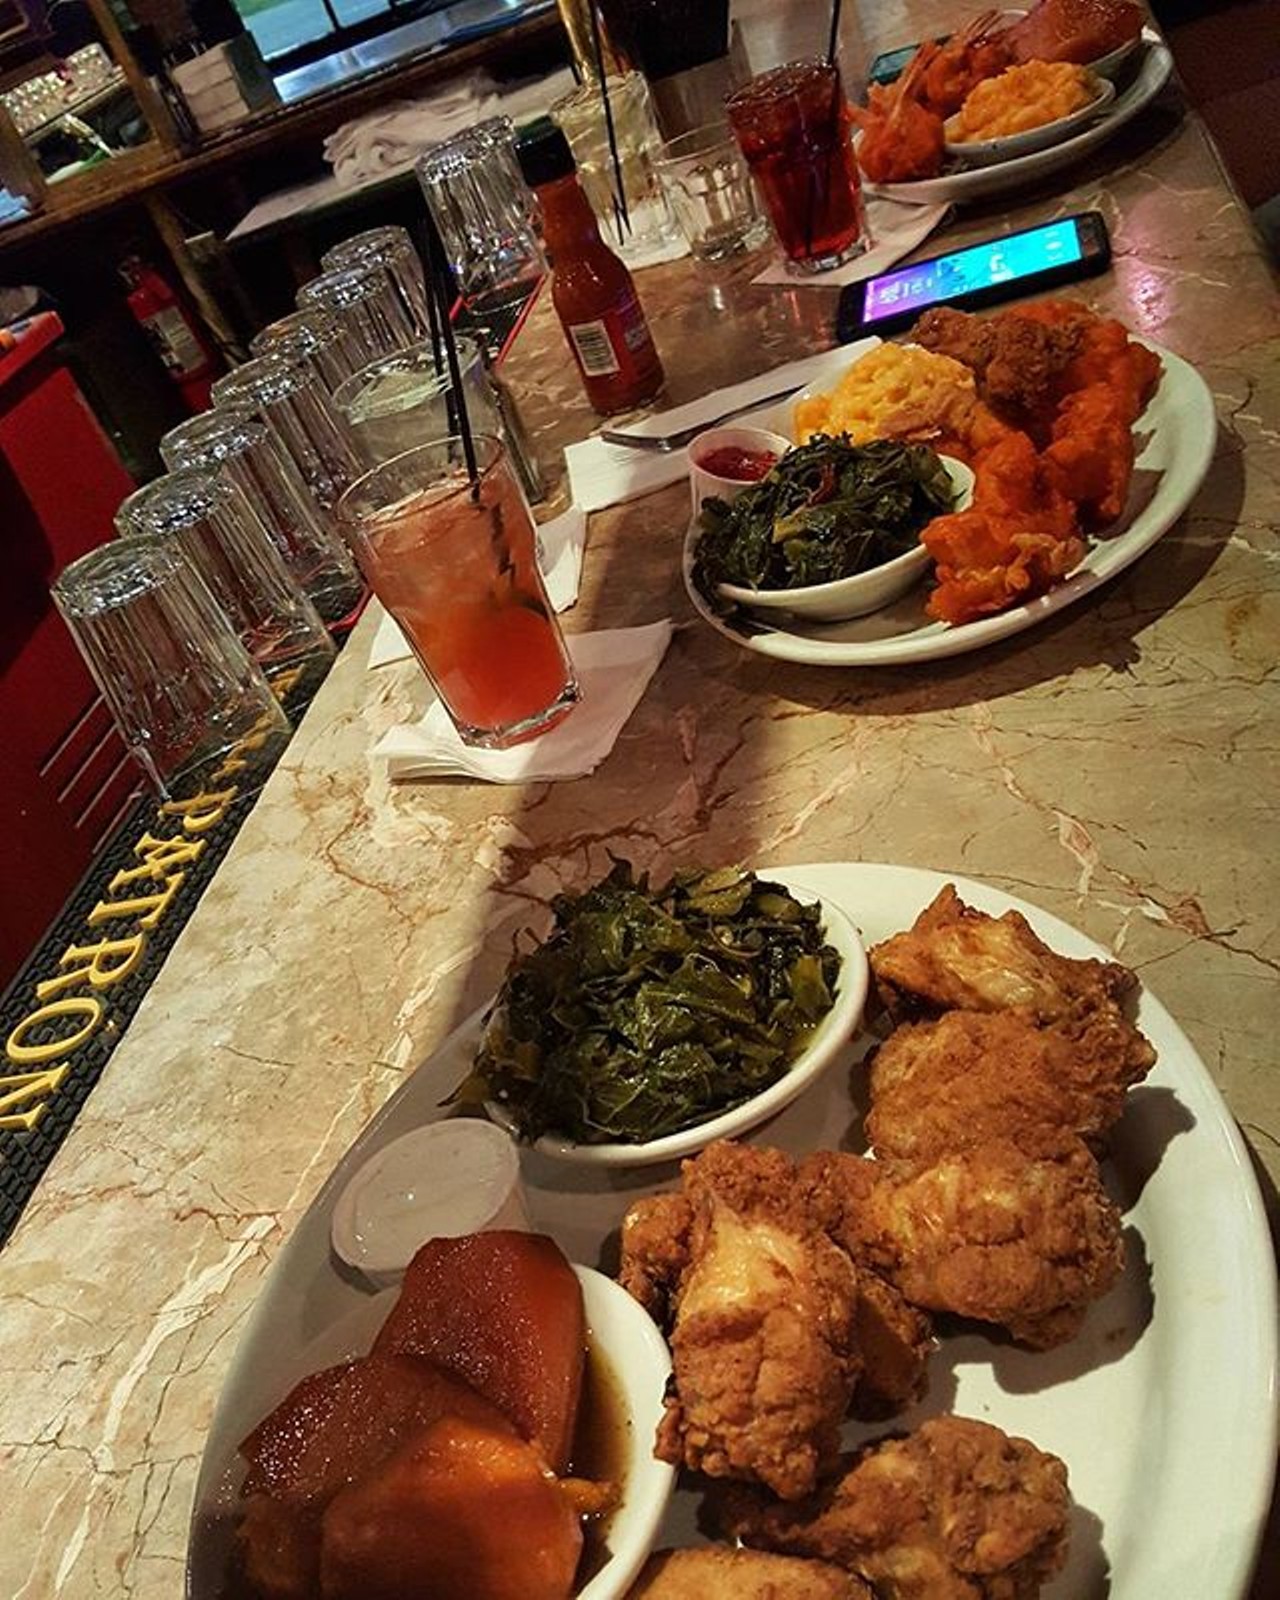 Floods Bar and Grille, 731 St. Antoine This downtown establishment, owned by the same Byrd family behind The Block in Midtown, has been serving up soul food, drinks, and live entertainment for almost 30 years. (Photo via Instagram user @kanitaunique)